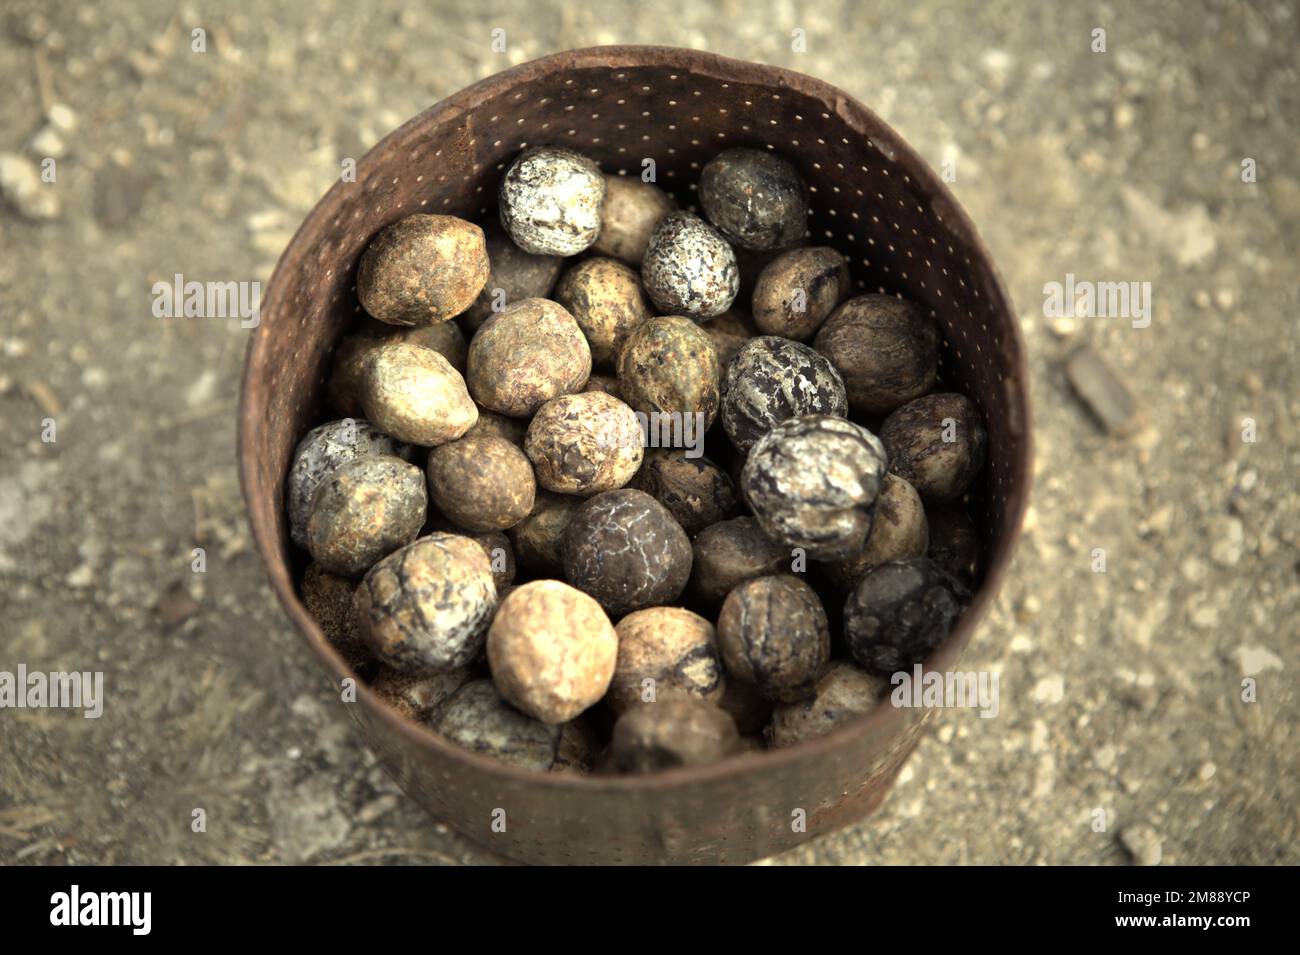 Harvested candlenuts (Aleurites moluccana), known as kemiri in Indonesia; are photographed in front of a house in the indigenous village of Praijing in Tebara, Waikabubak, West Sumba, Sumba Island, in East Nusa Tenggara province of Indonesia. Stock Photo